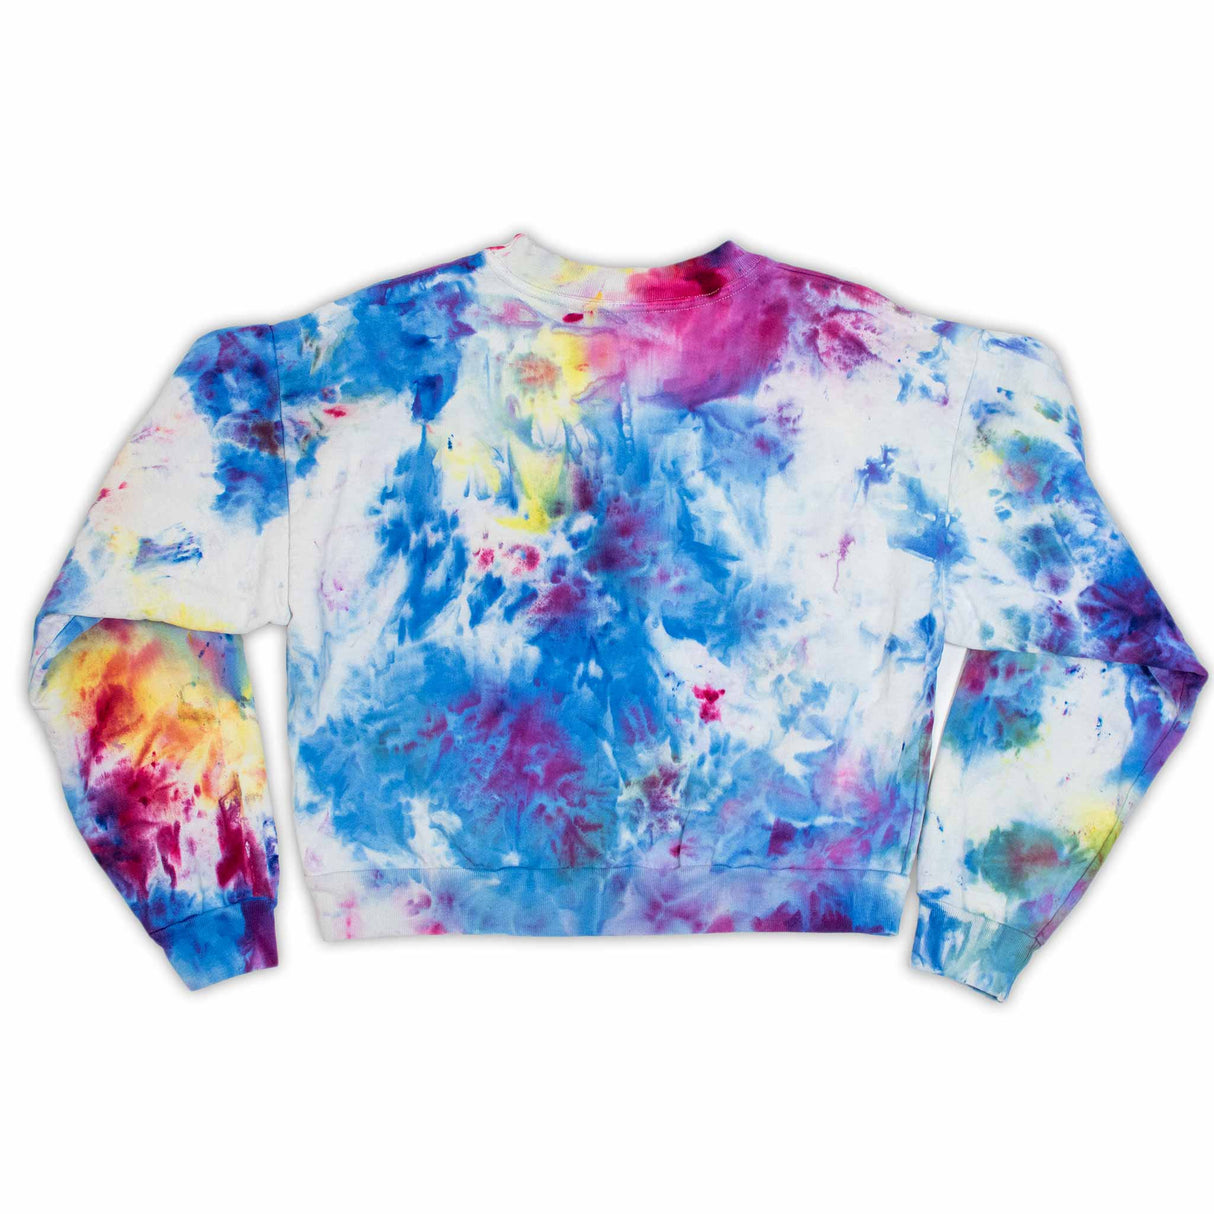 A snug and stylish cropped sweatshirt for women, with an eye-catching ice dye mix of warm pinks, cool blues, and vibrant yellows, perfect for a cozy day in or a casual outing.